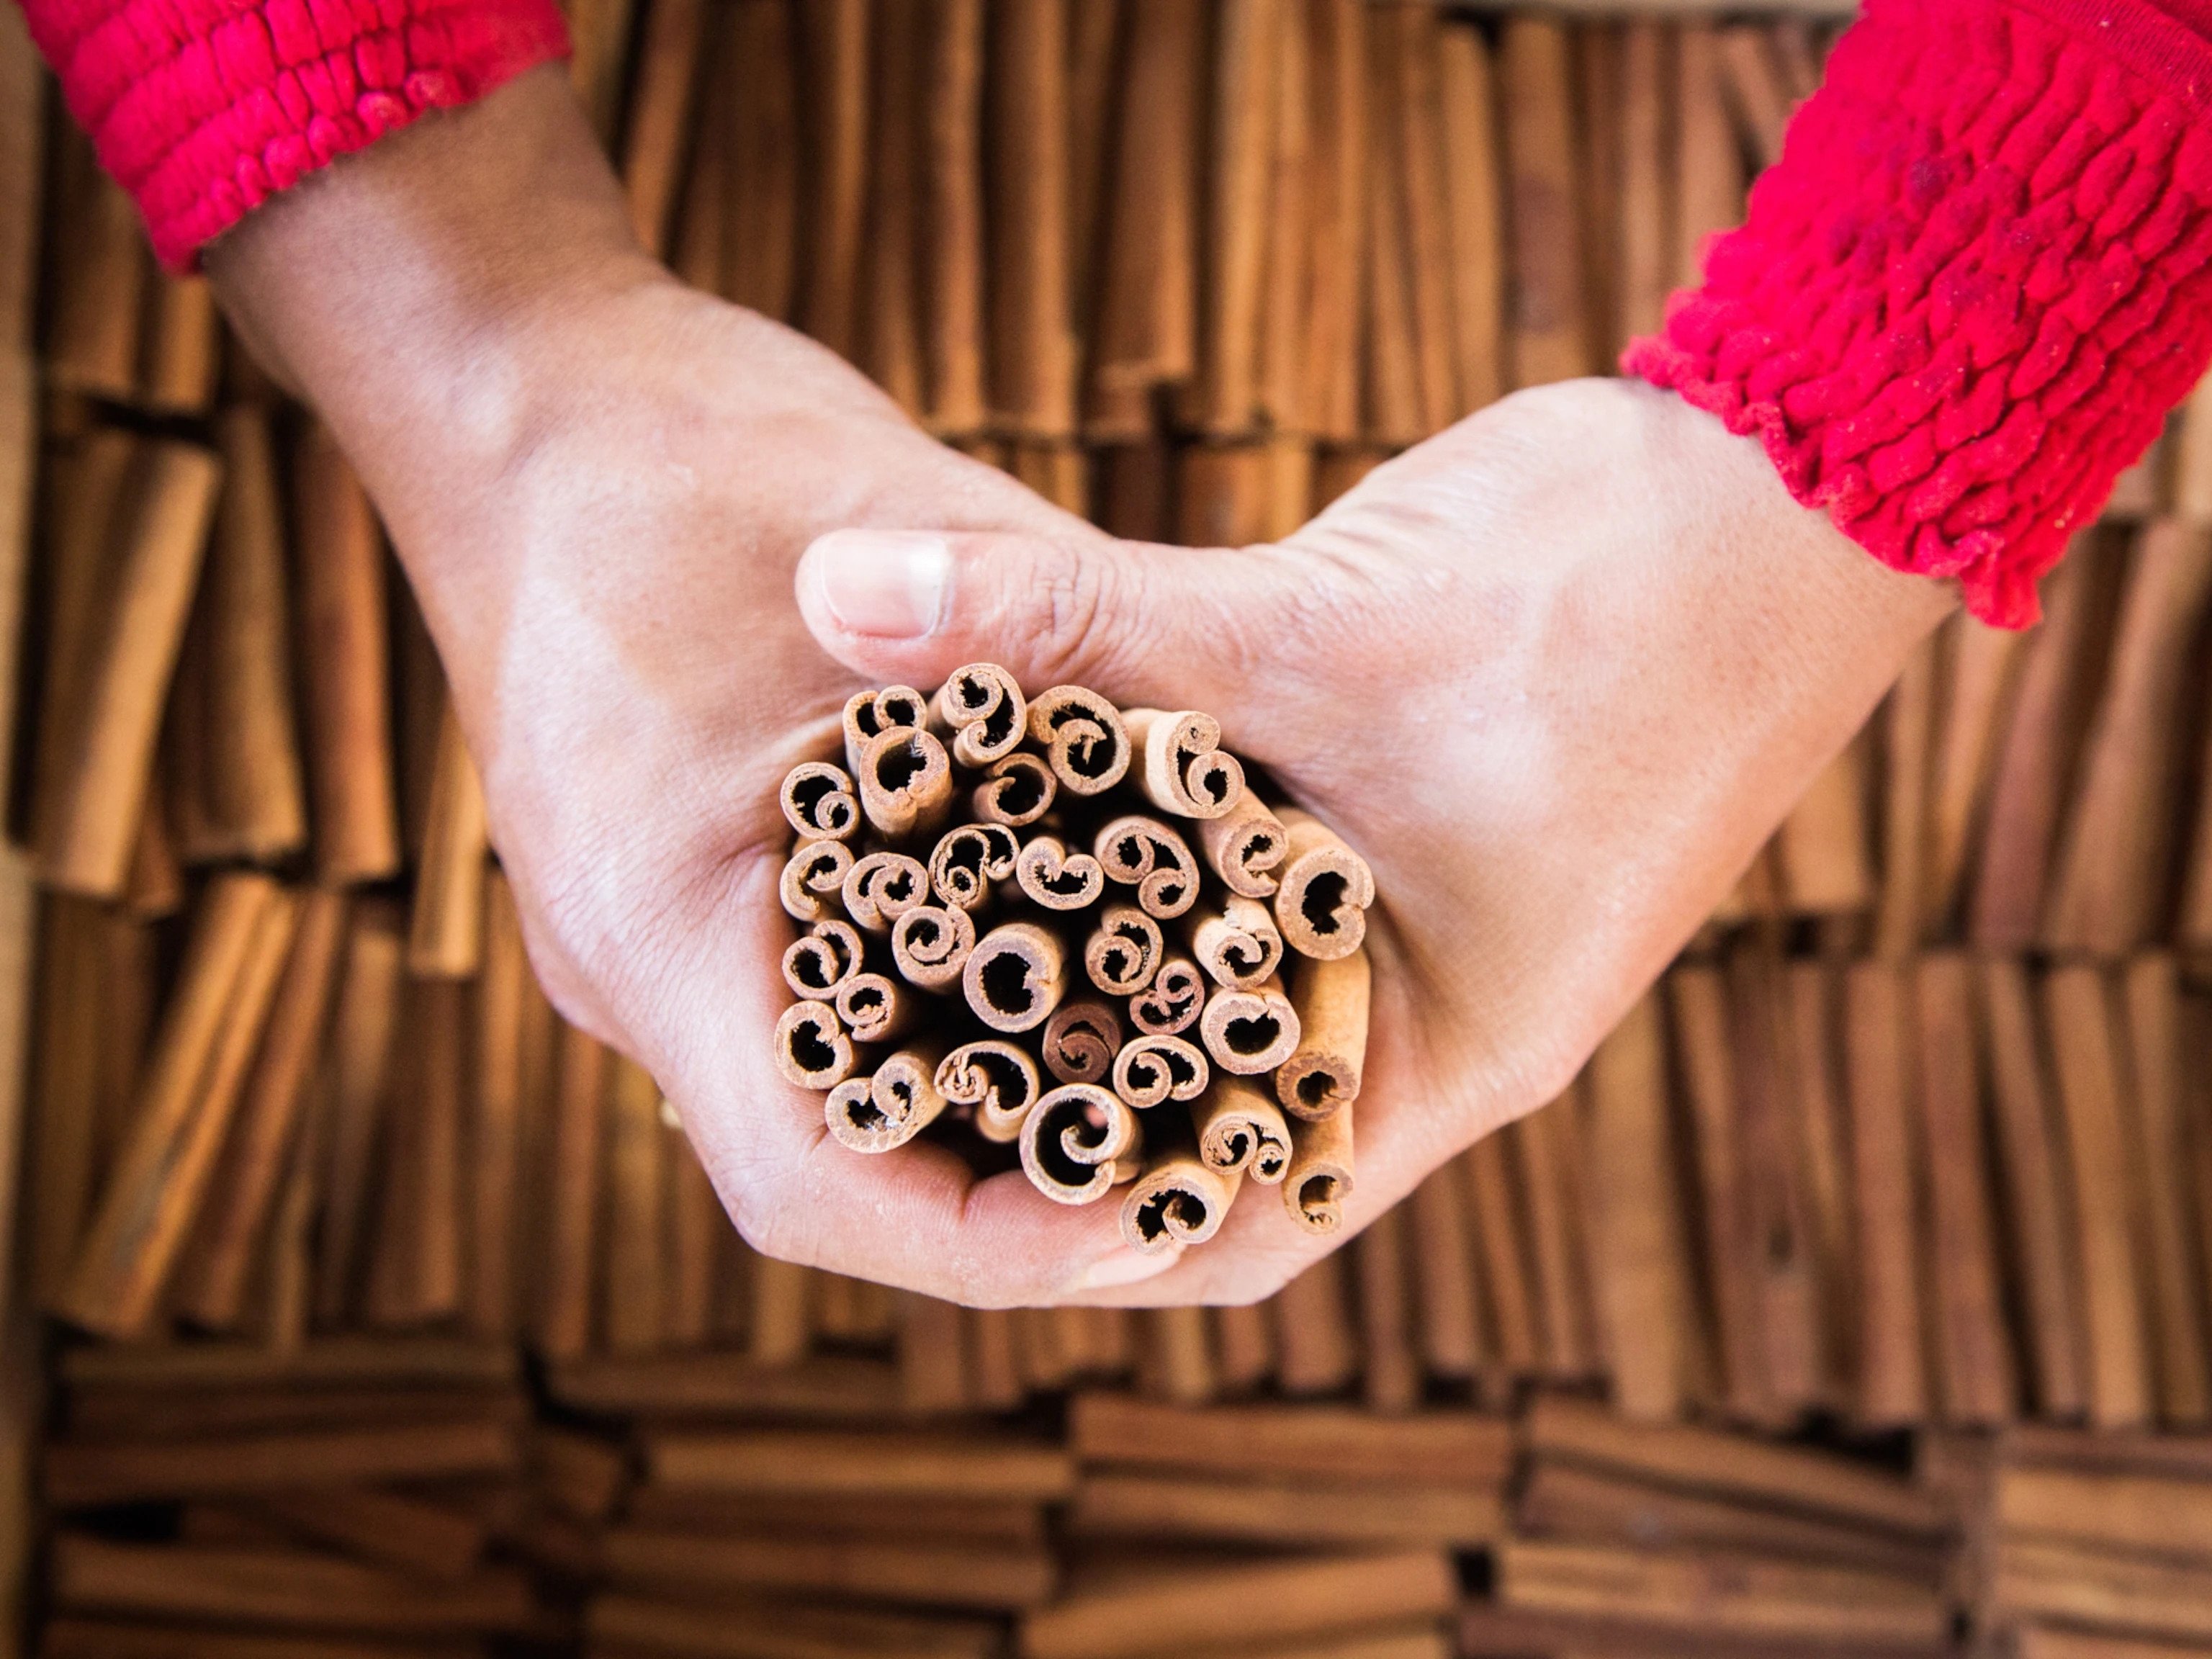 Harvesting Cinnamon - Production Of The Most Lovely And Fragrant Spice